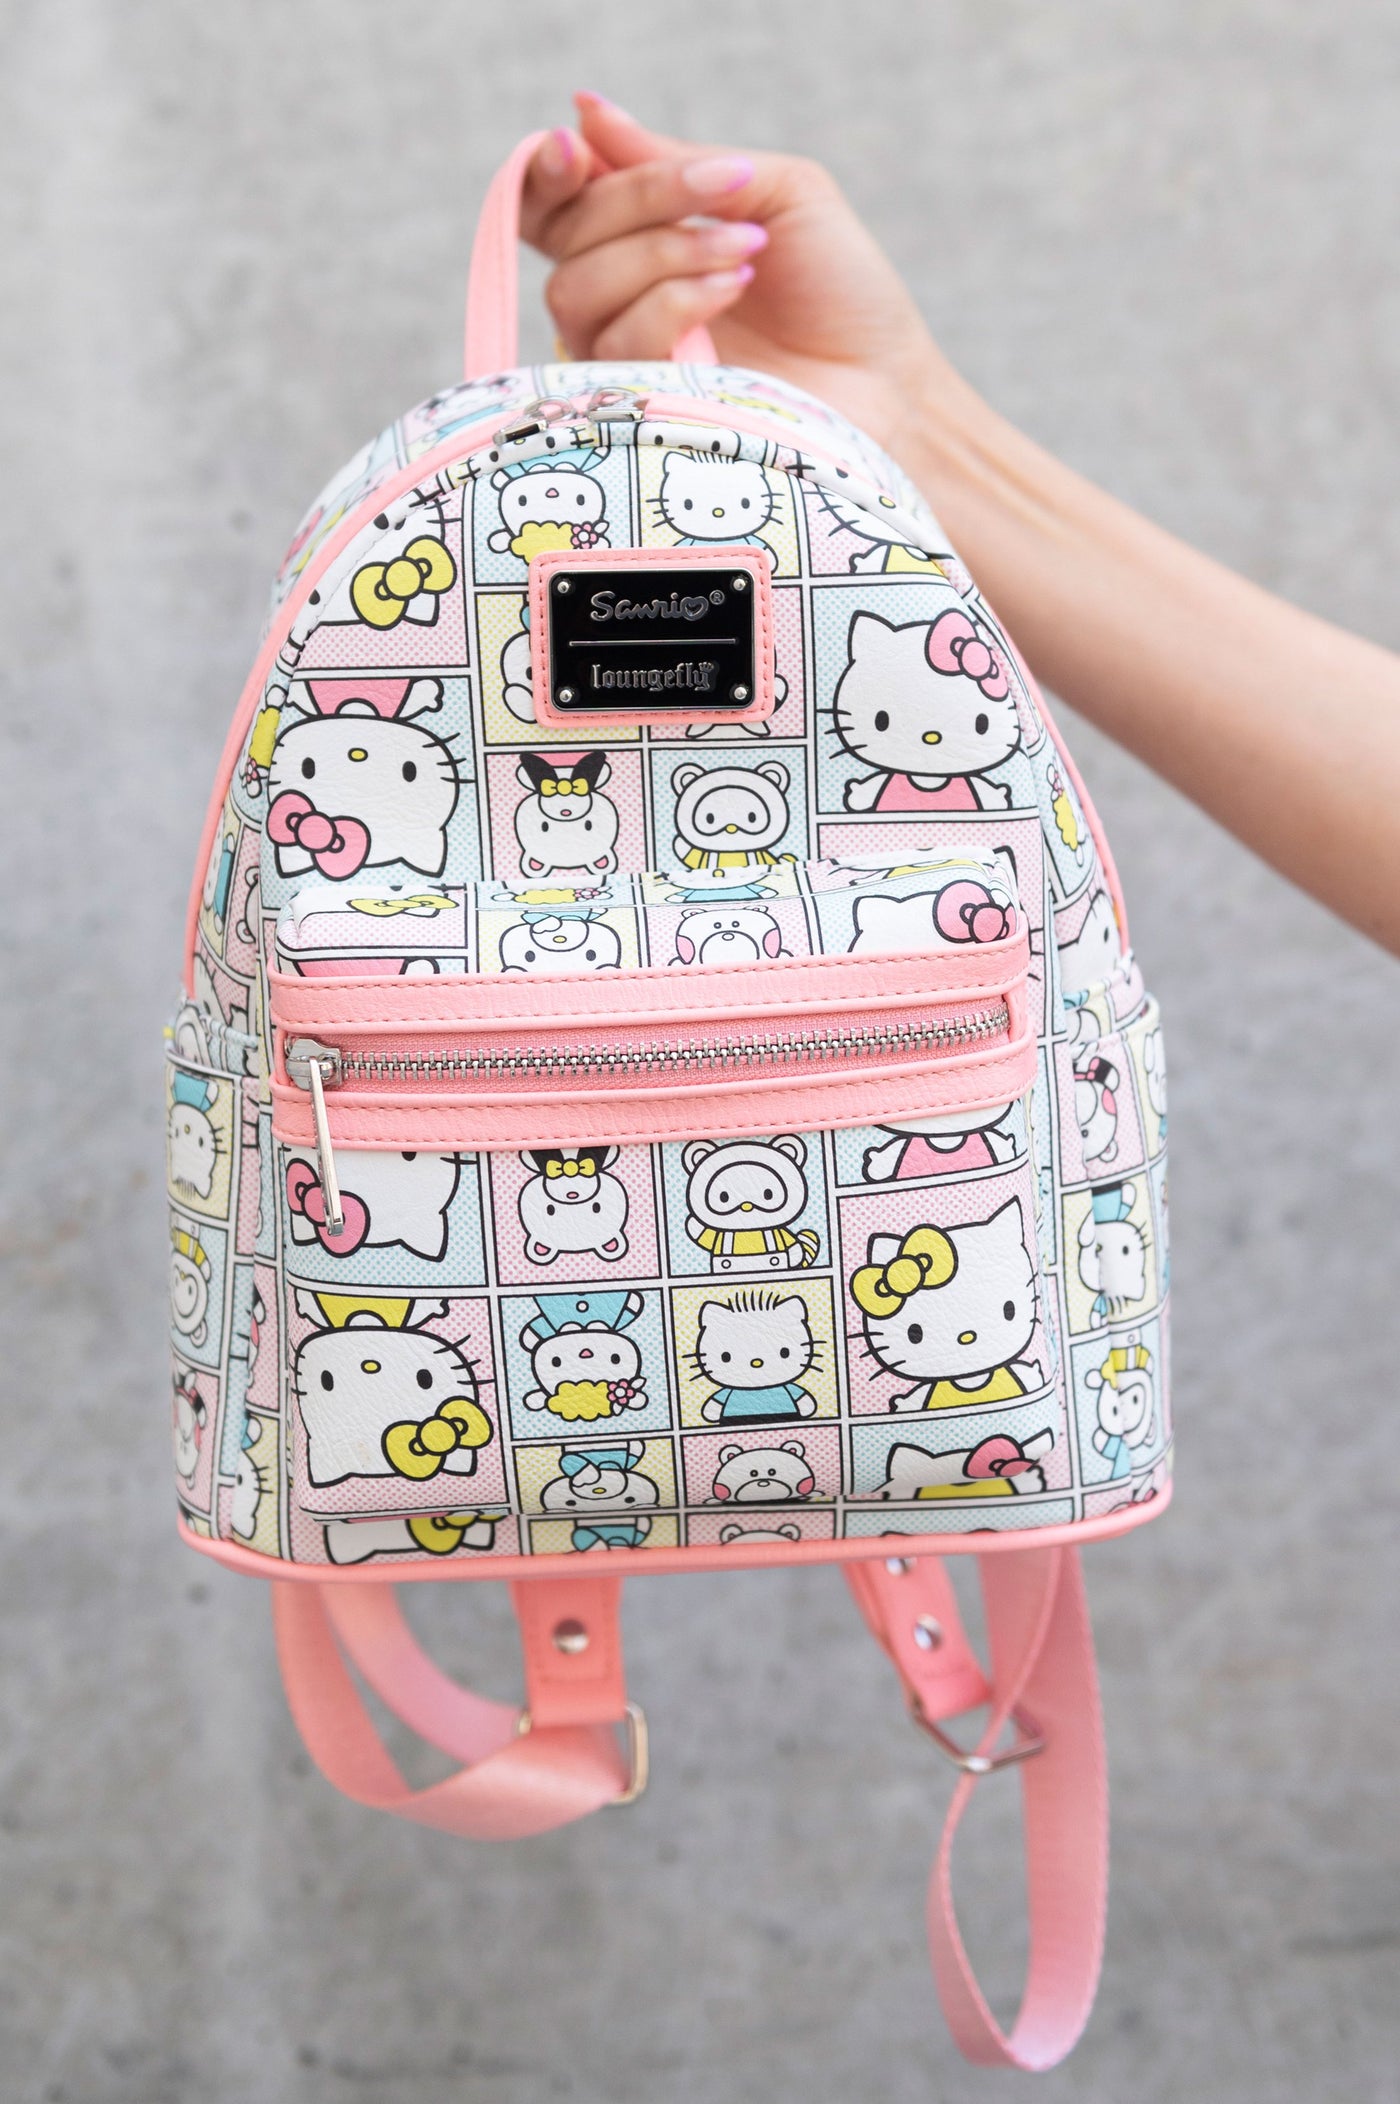 707 Street Exclusive - Loungefly Sanrio Hello Kitty and Friends Mini Backpack - IRL Front